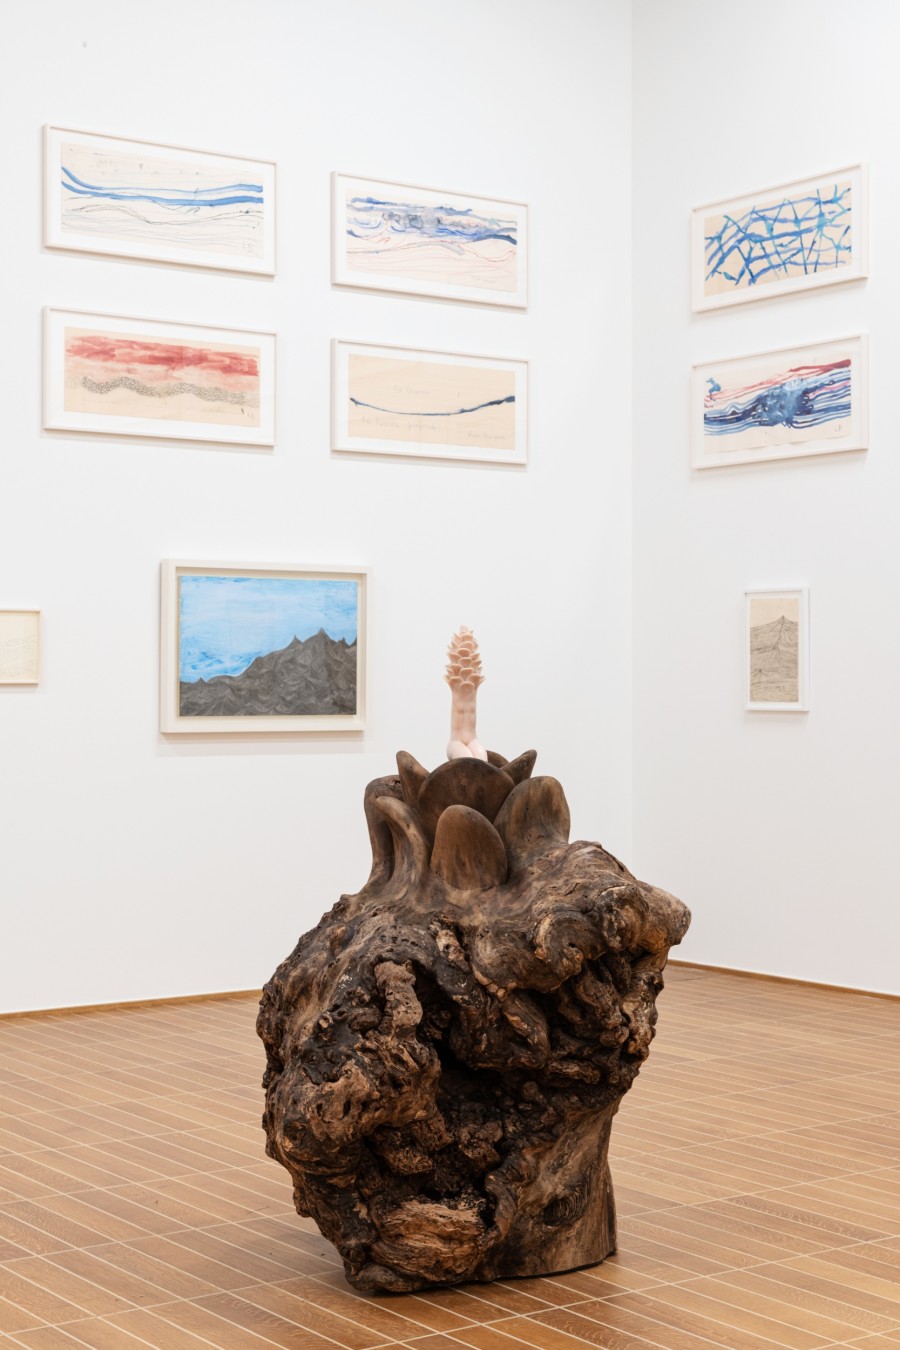 Exhibition view, Louise Bourgeois x Jenny Holzer Solo Show, The Violence of Handwriting Across a Page; view on Louise Bourgeois, Topiary, 2005. Kunstmuseum Basel, 2022. Photo: Jonas Hänggi. Courtesy: The Easton Foundation and ProLitteris